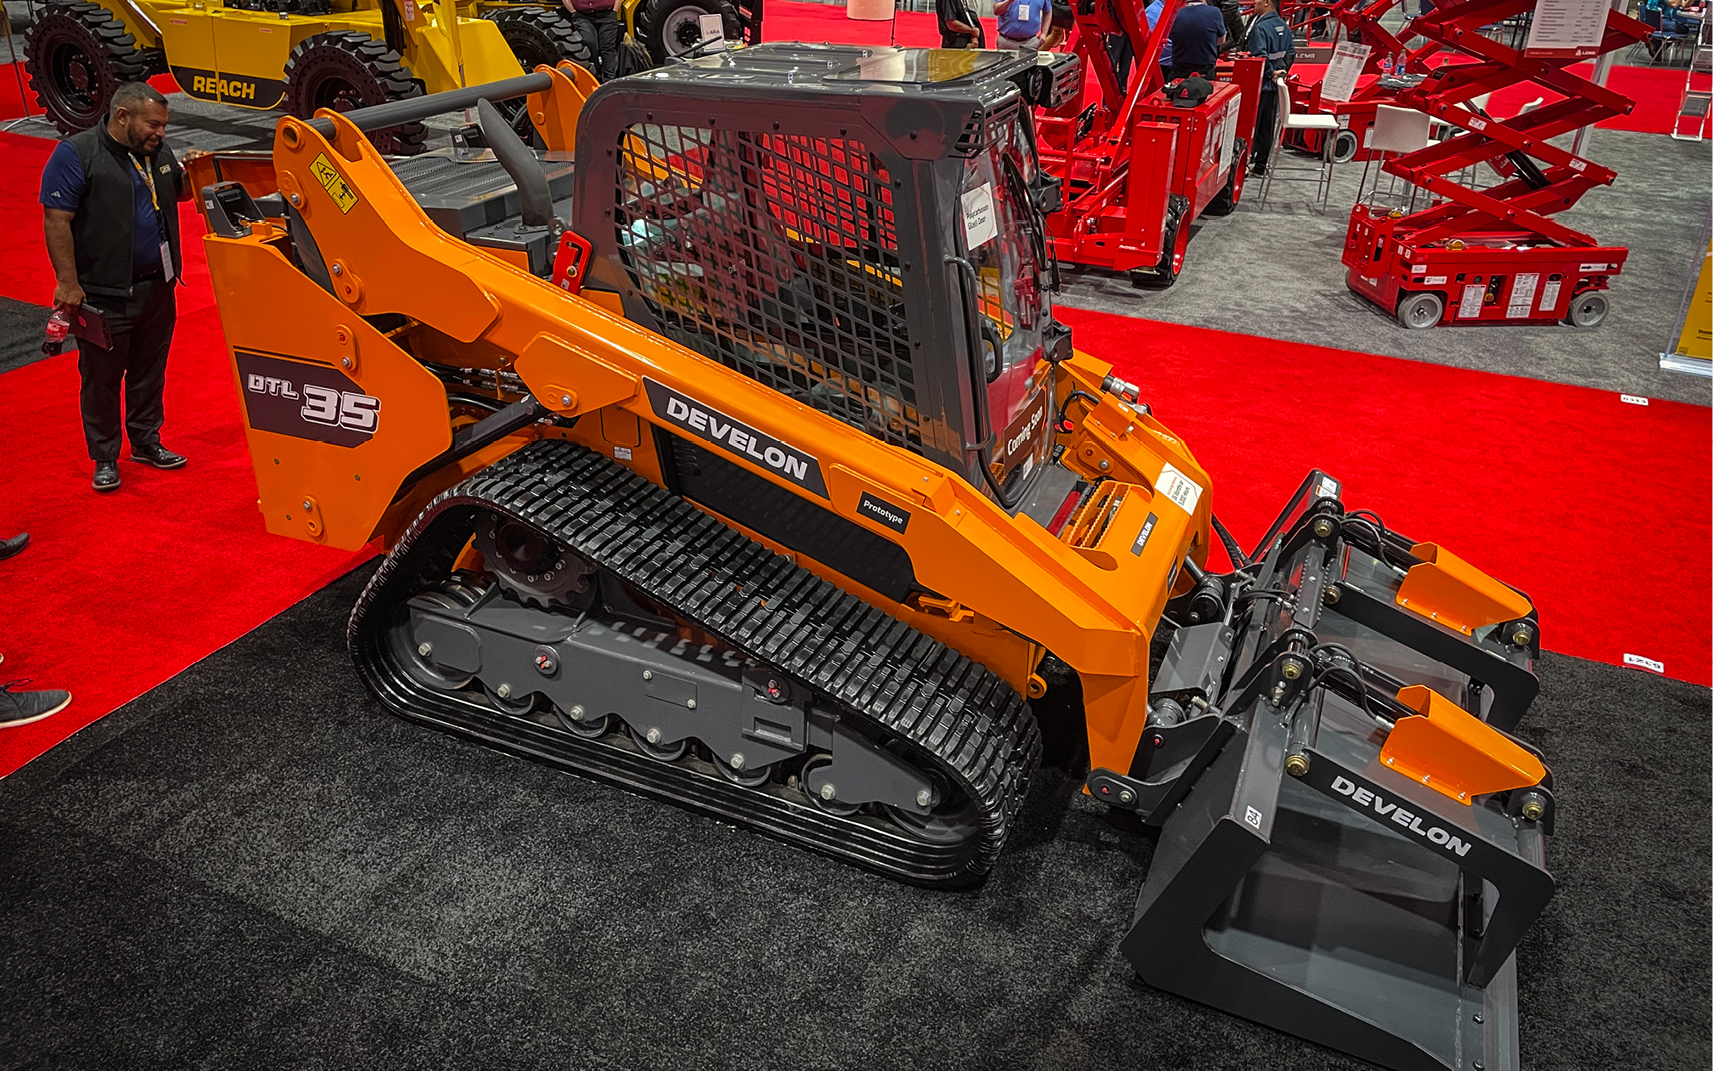 The new DEVELON DTL35 compact track loader is on display at The ARA Show 2024 in New Orleans.